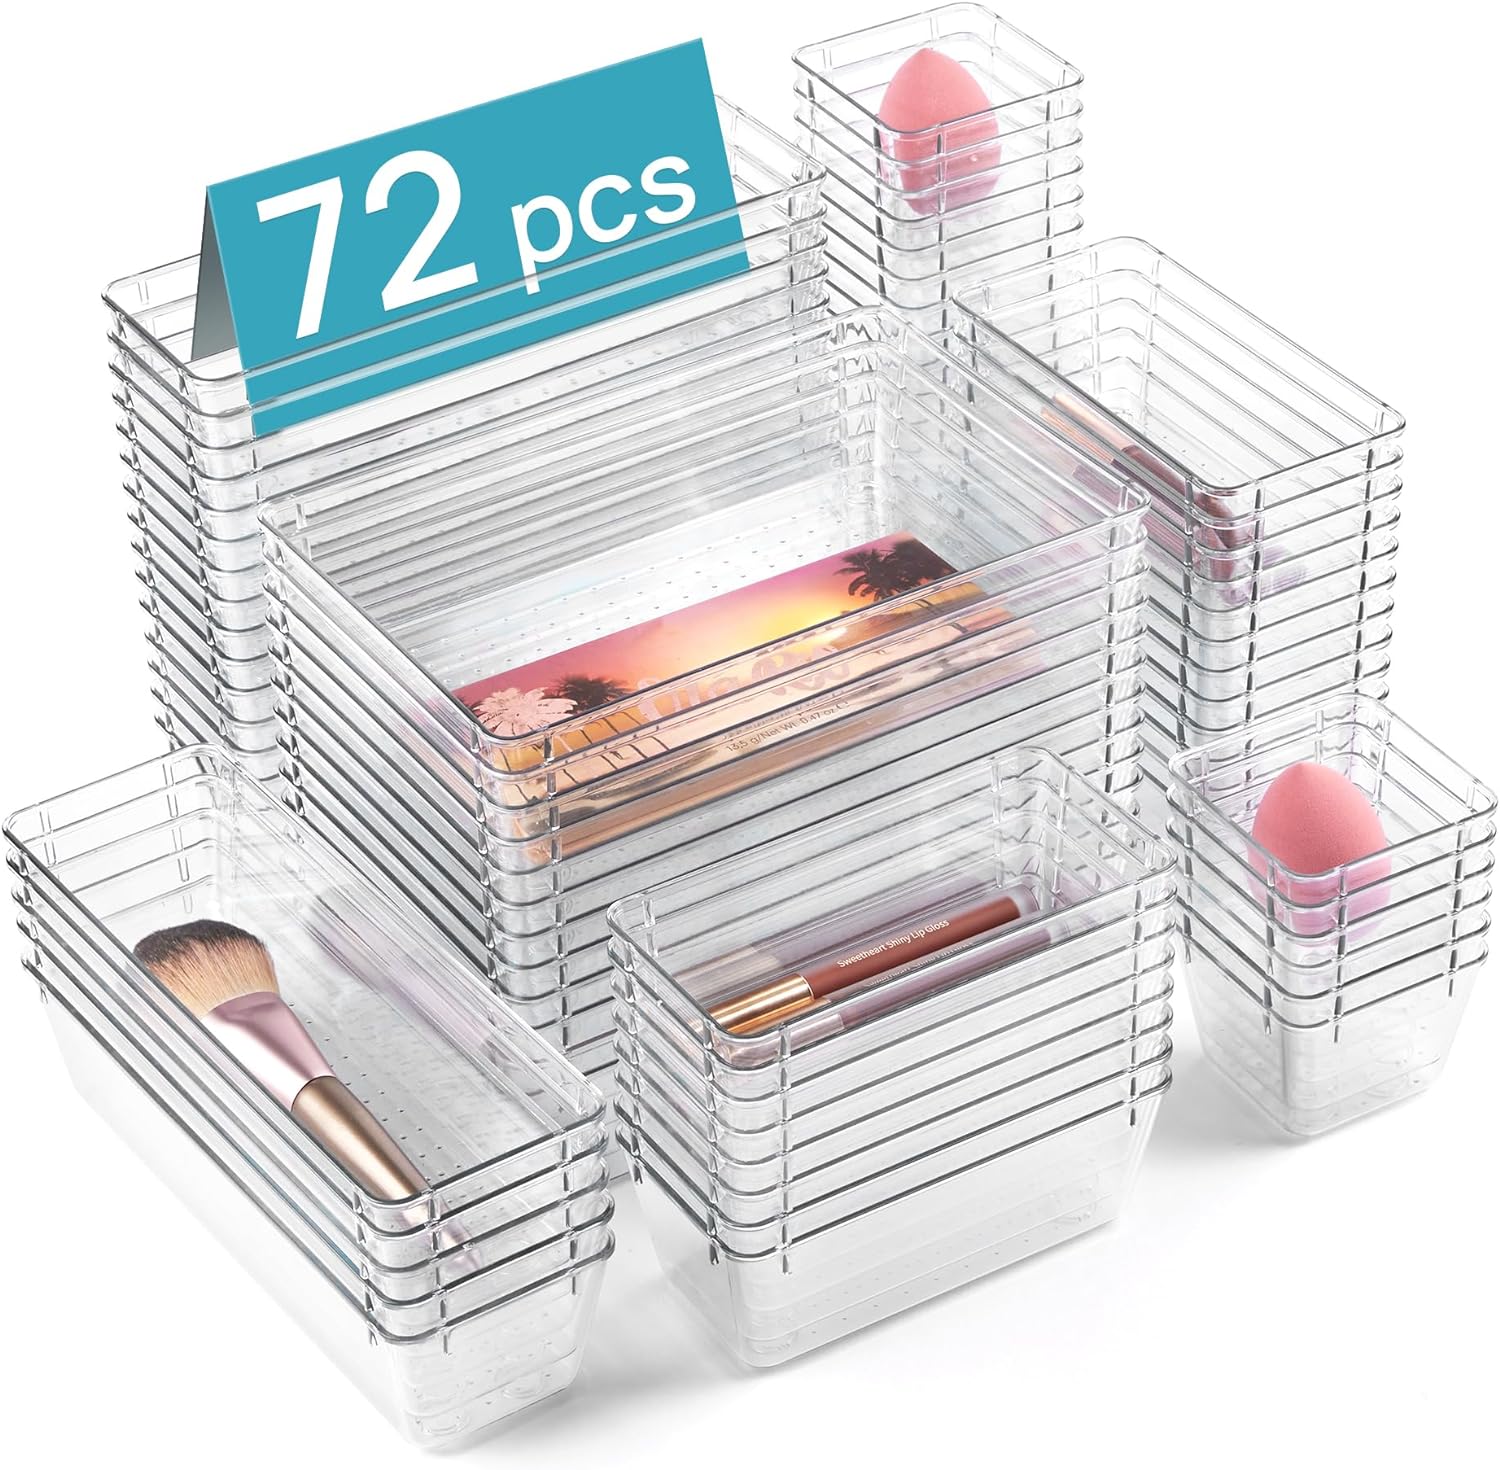 25 PCS Clear Plastic Drawer Organizers Set, 4-Size Versatile Bathroom and Vanity Drawer Organizer Trays, Storage Bins for Makeup, Bedroom, Kitchen Gadgets Utensils and Office